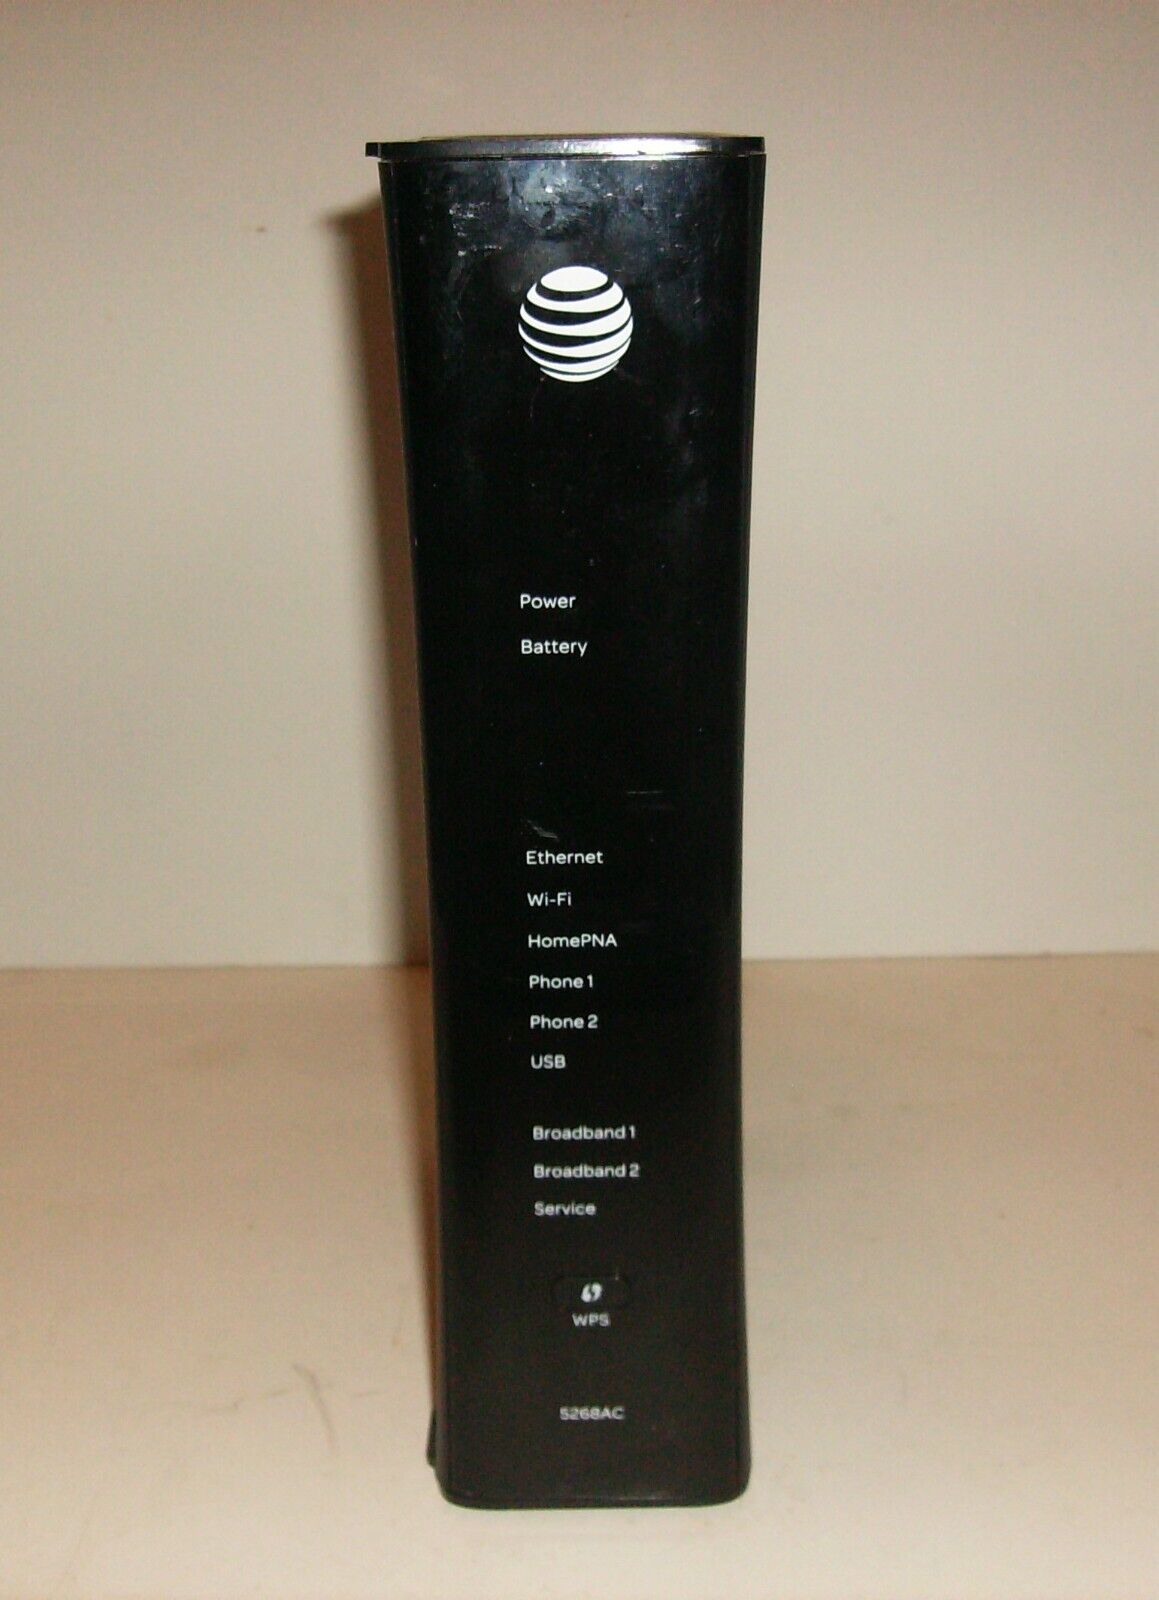 AT&T U-Verse/Pace 5268AC 1733 mbps Gateway Wireless Router/Modem A+++ Condition